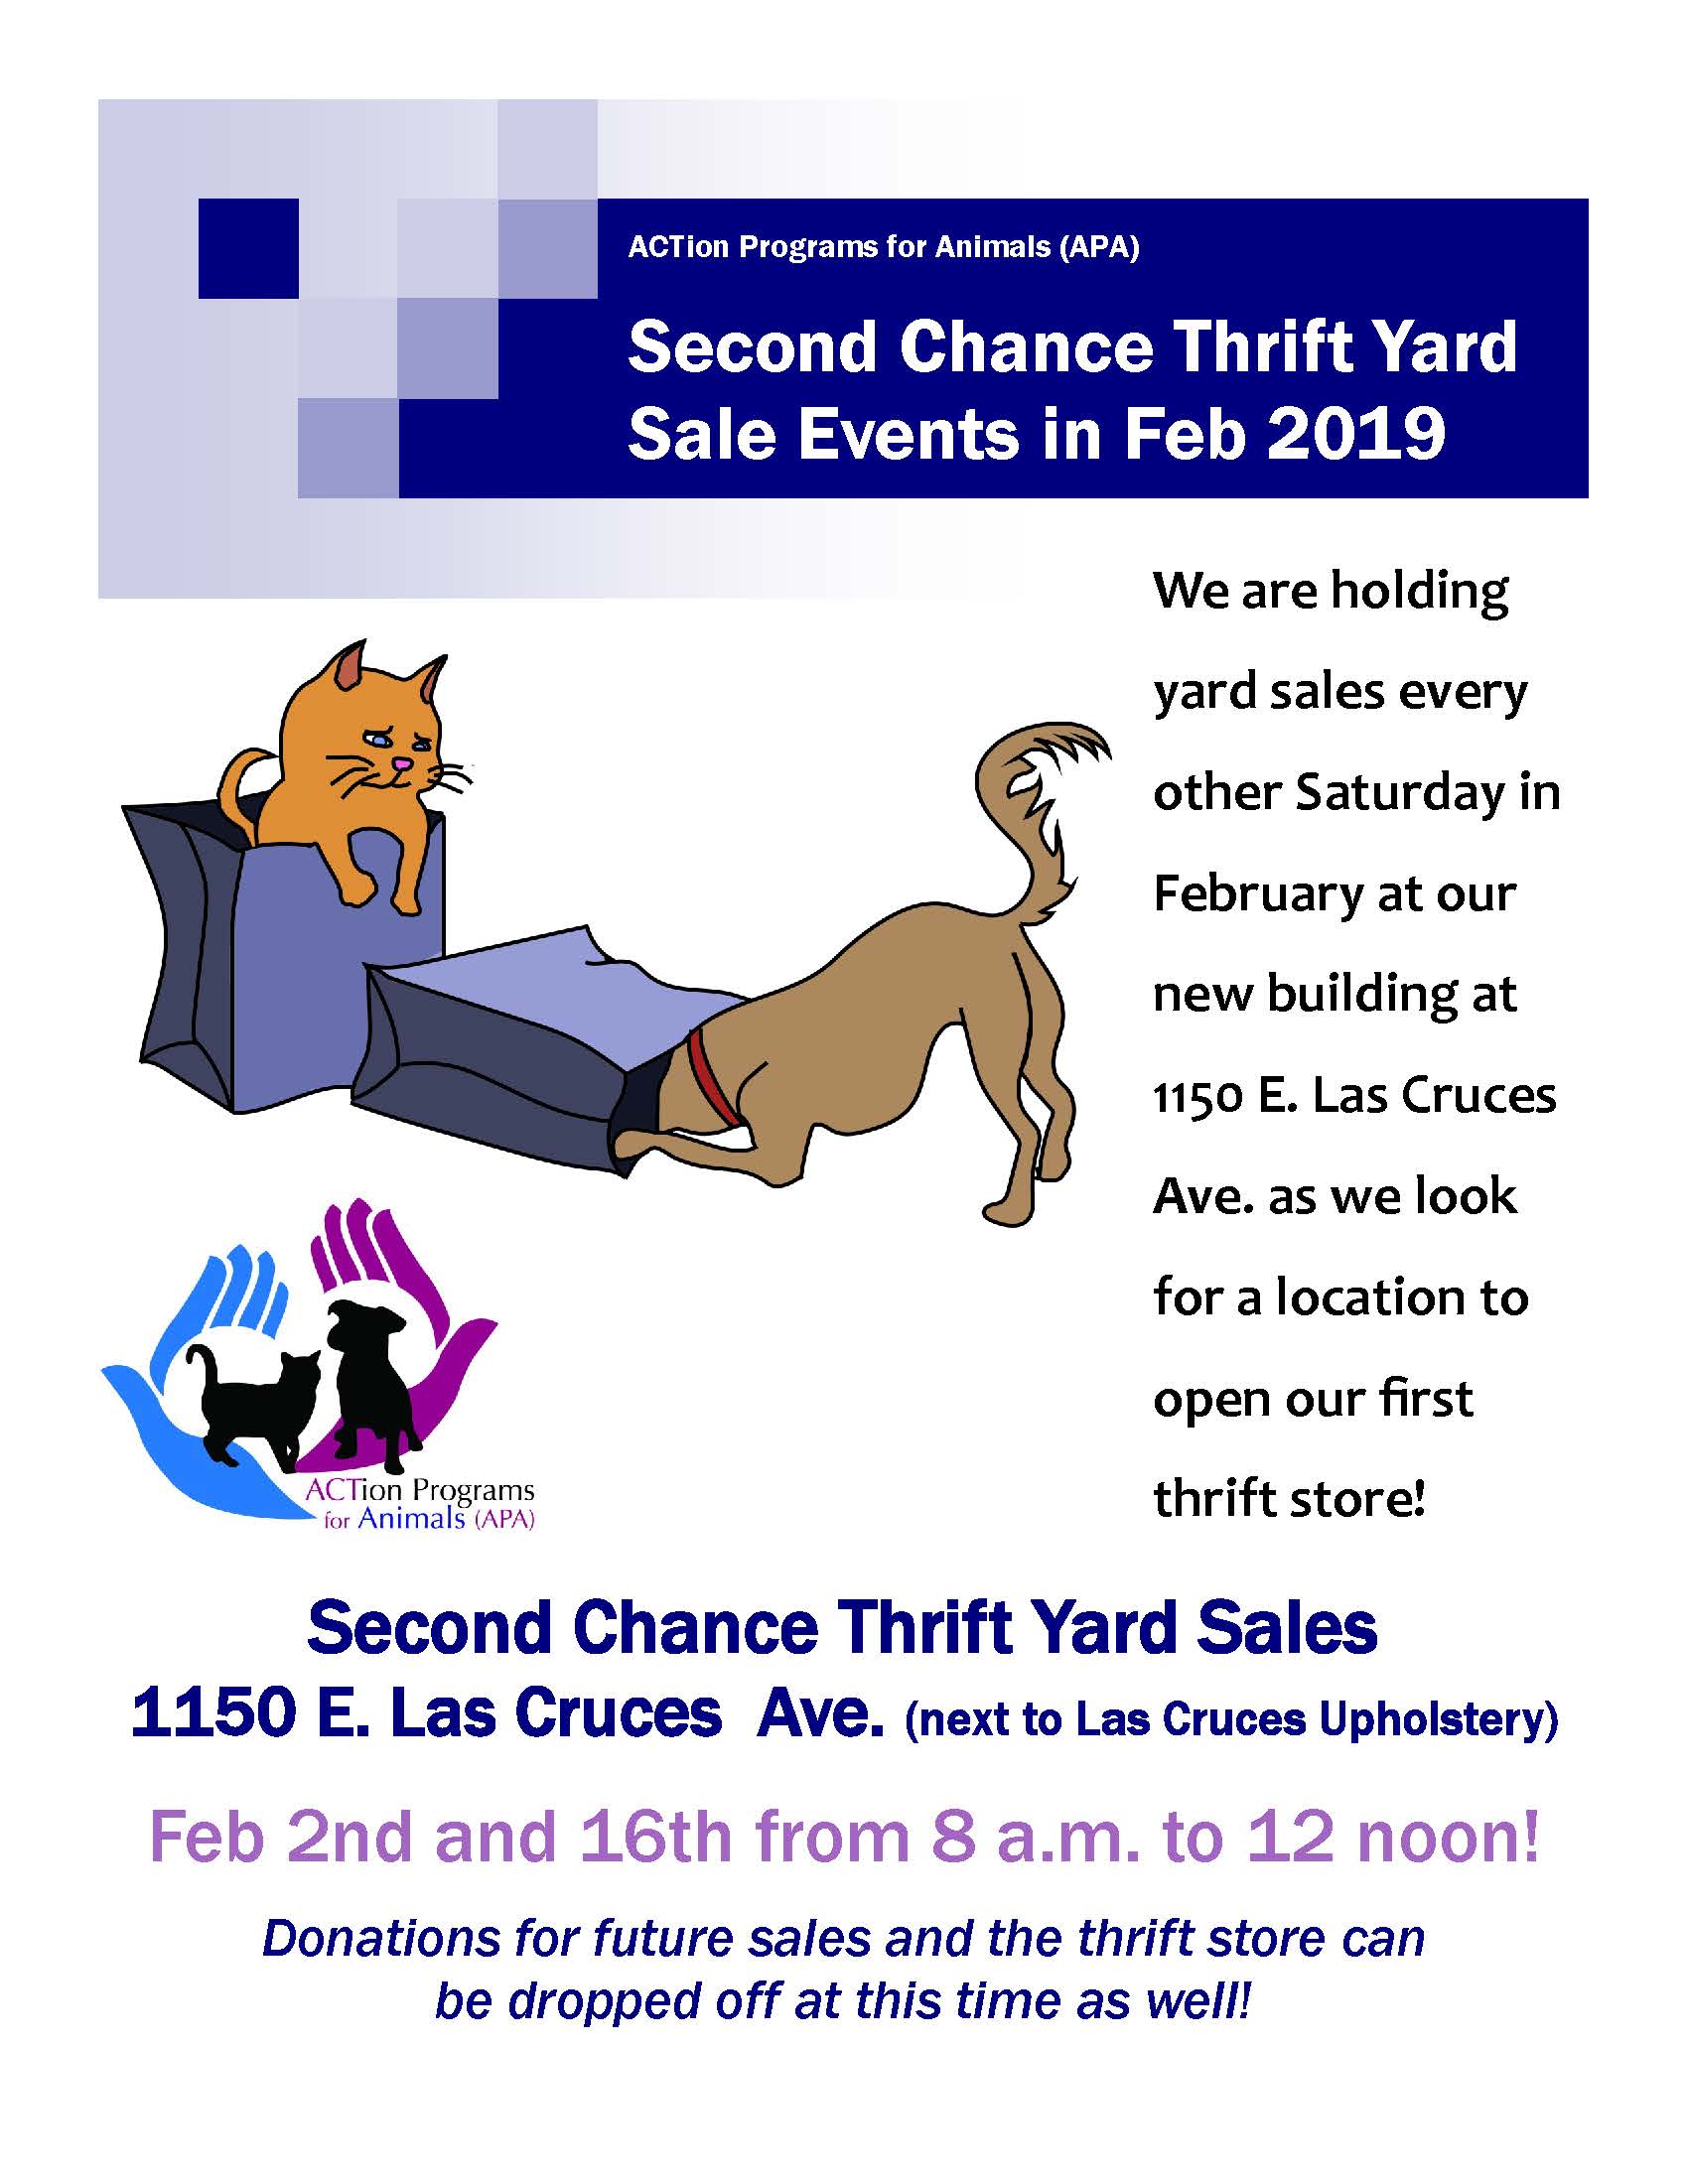 Thrift Yard Sales benefiting ACTion Programs for Animals - Dog'Cruces